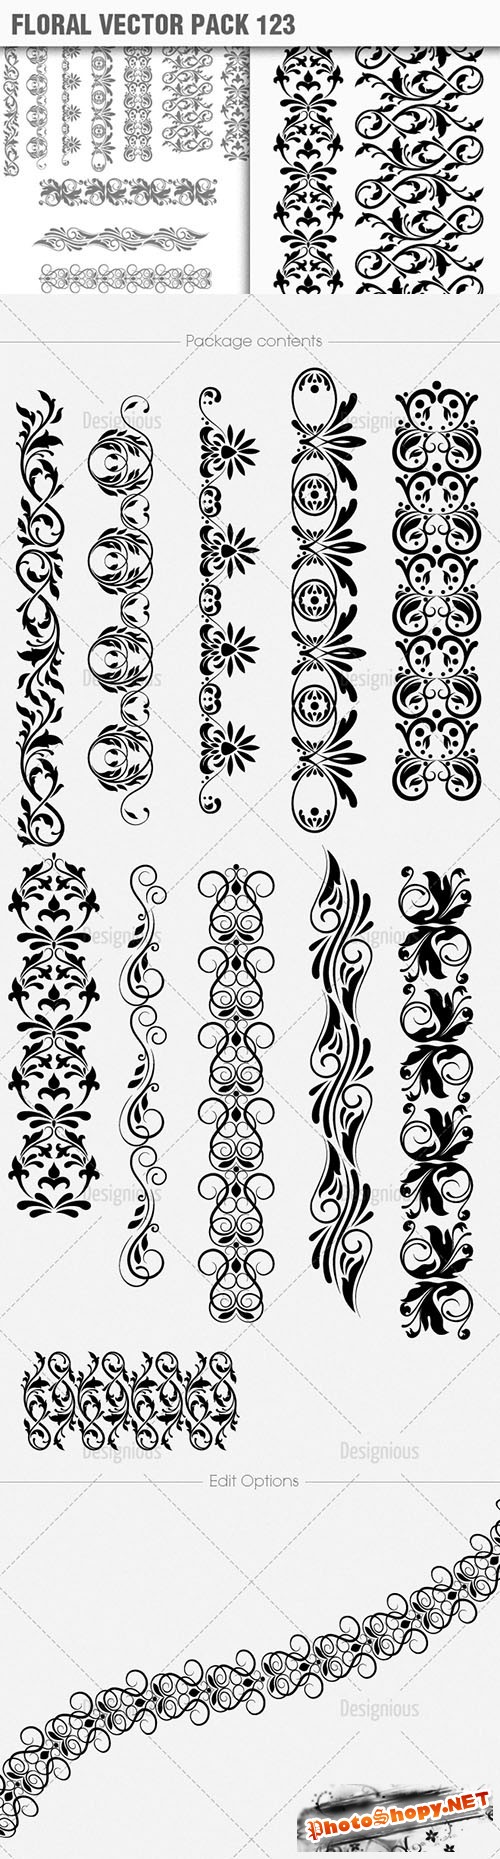 Floral Vector Pack 123